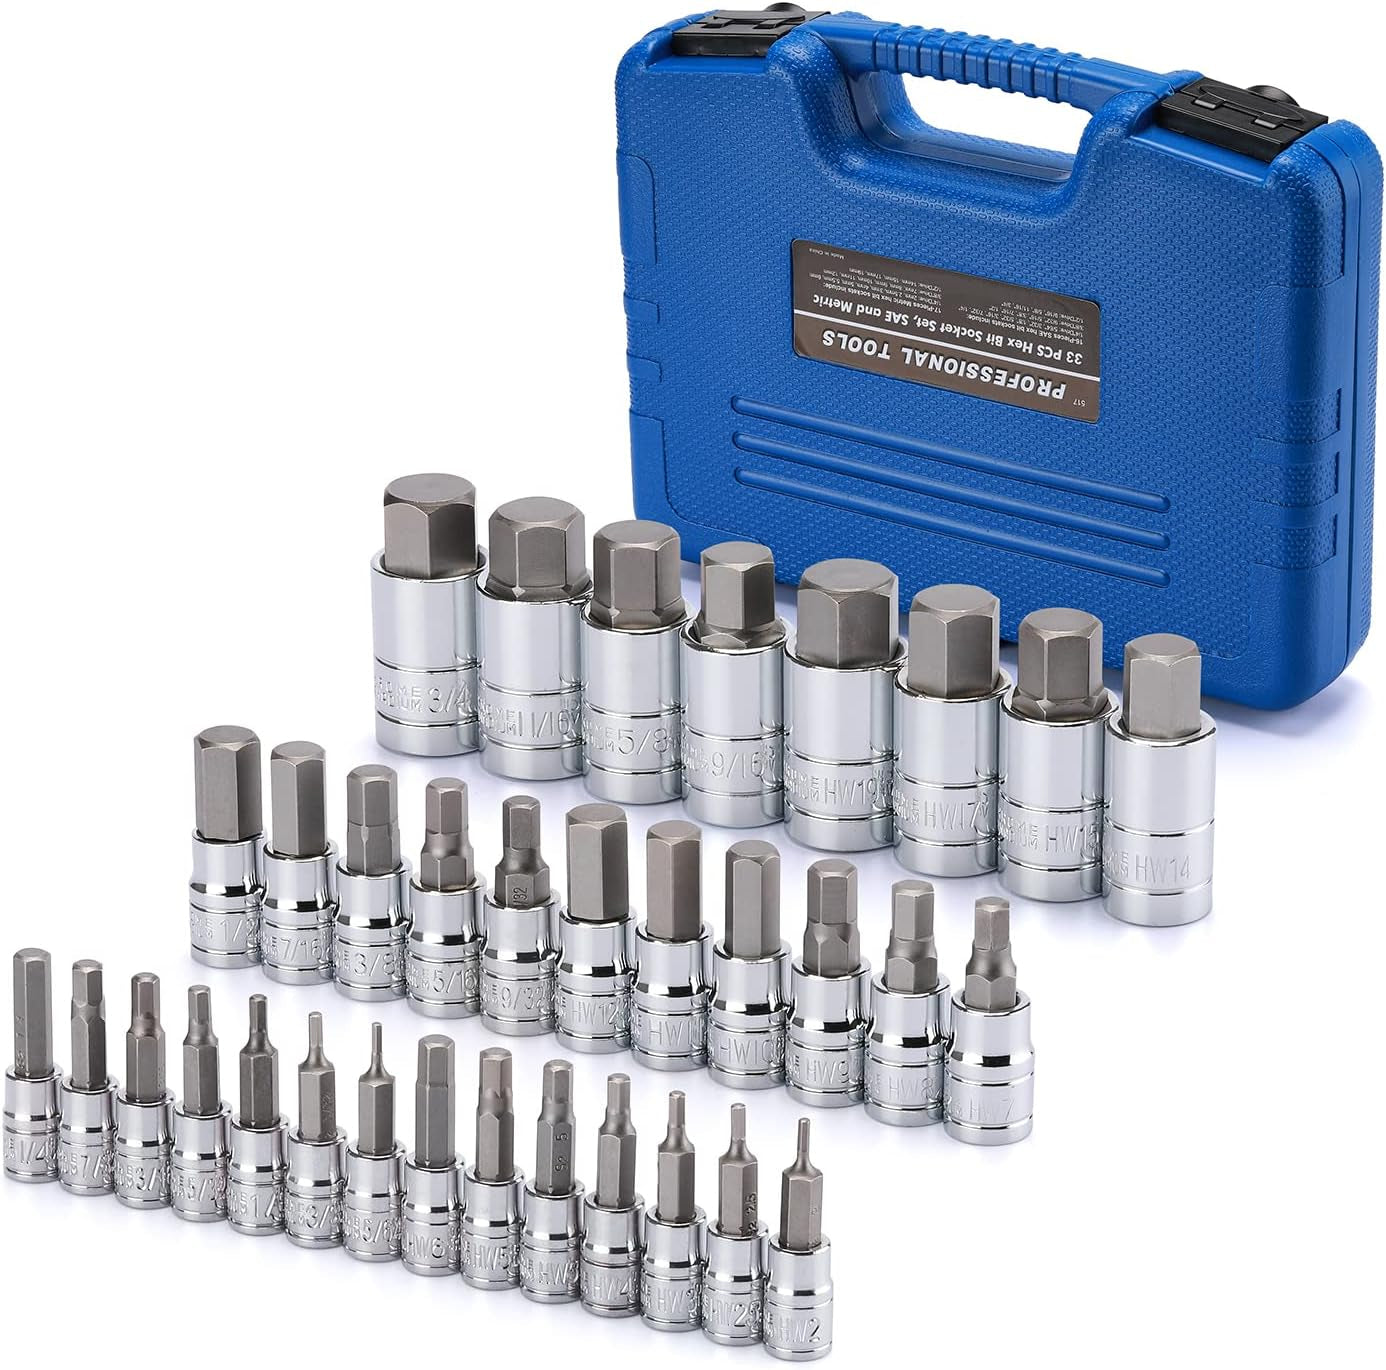 33PCS Master Hex Allen Bit Socket Set S2 & Cr-V Steel SAE and Metric 5/64-Inch to 3/4-Inch, 2mm to 19mm